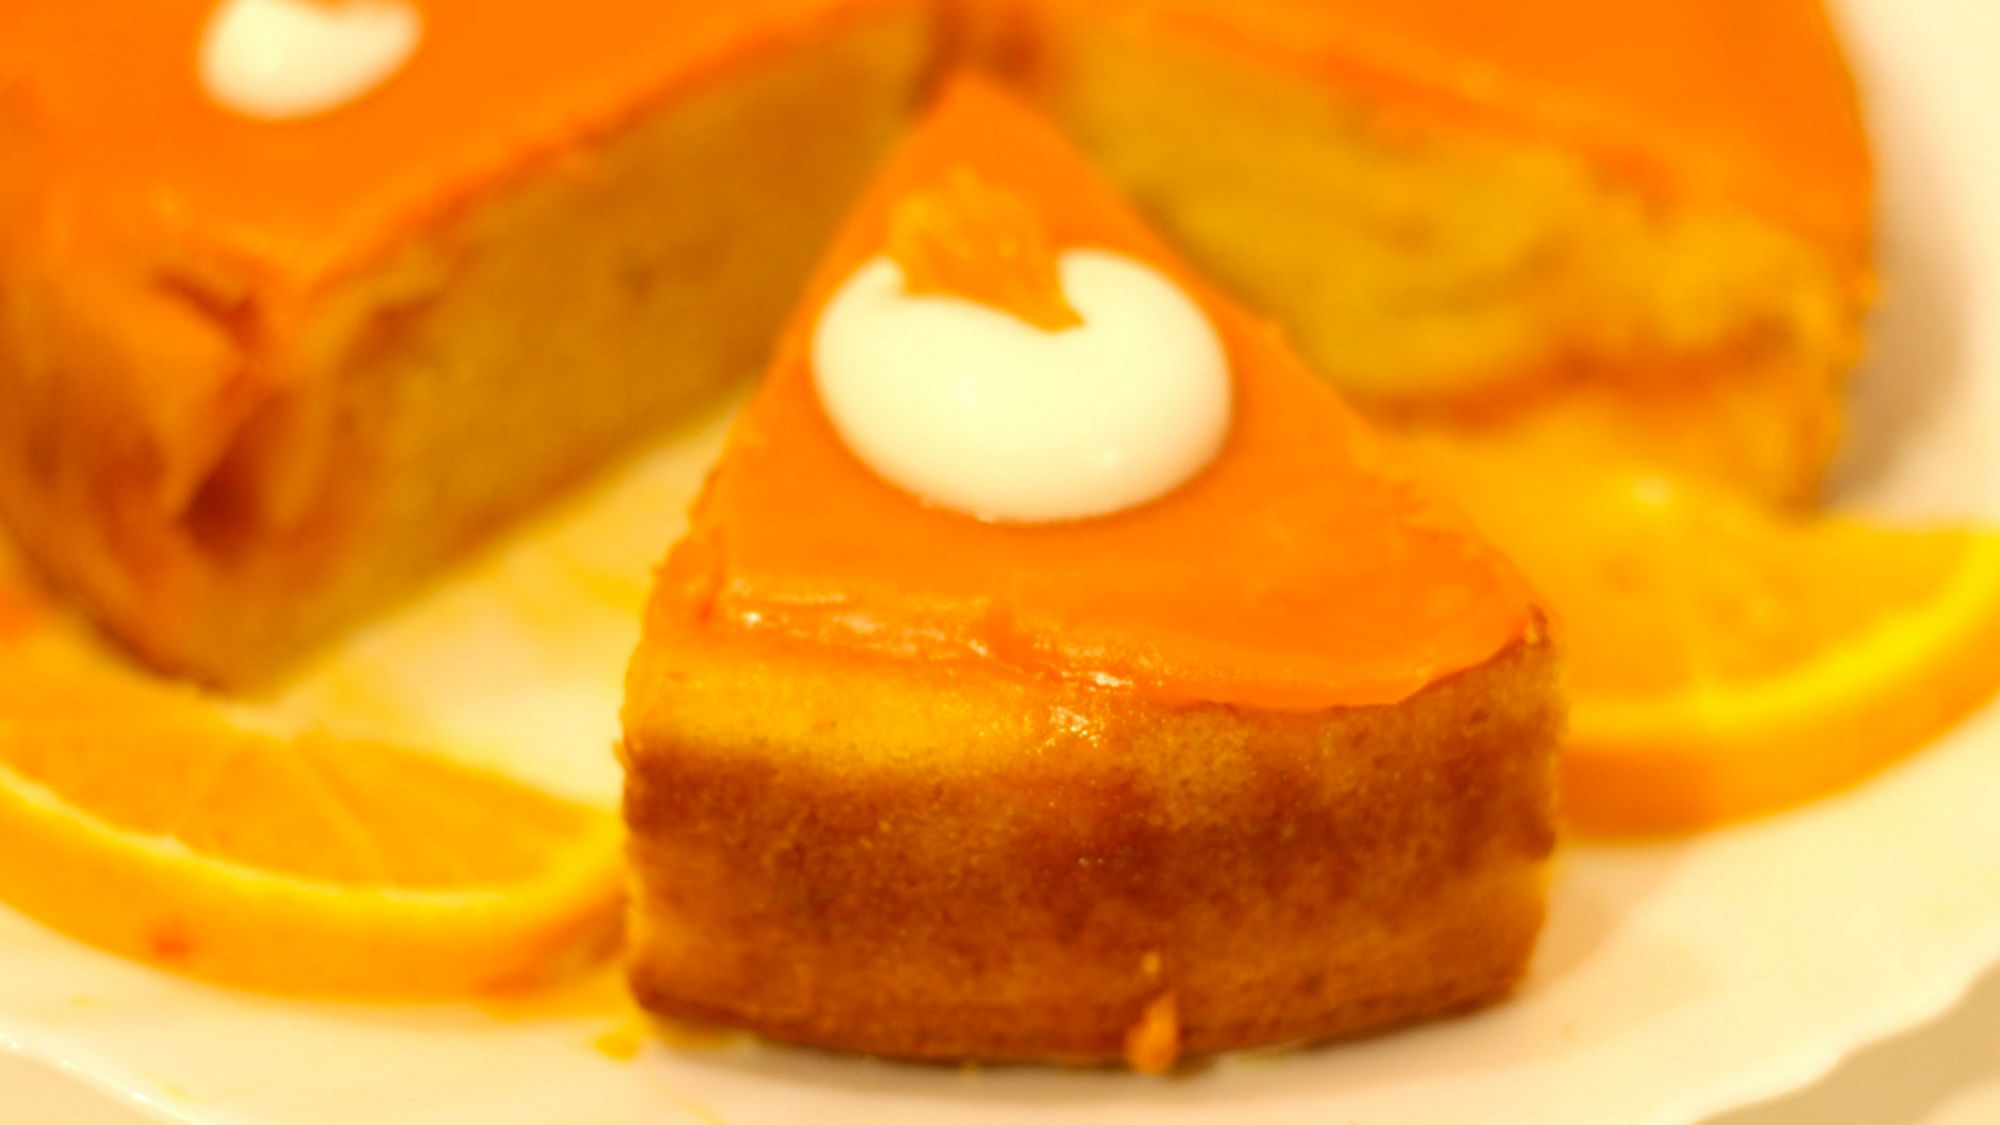 If the orange is your favourite winter fruit, you MUST try these awesome desserts. (Photo Courtesy: <a href="https://www.youtube.com/watch?v=dVzMcaKm7_8">YouTube screengrab/Barnali’s Kitchen</a>)